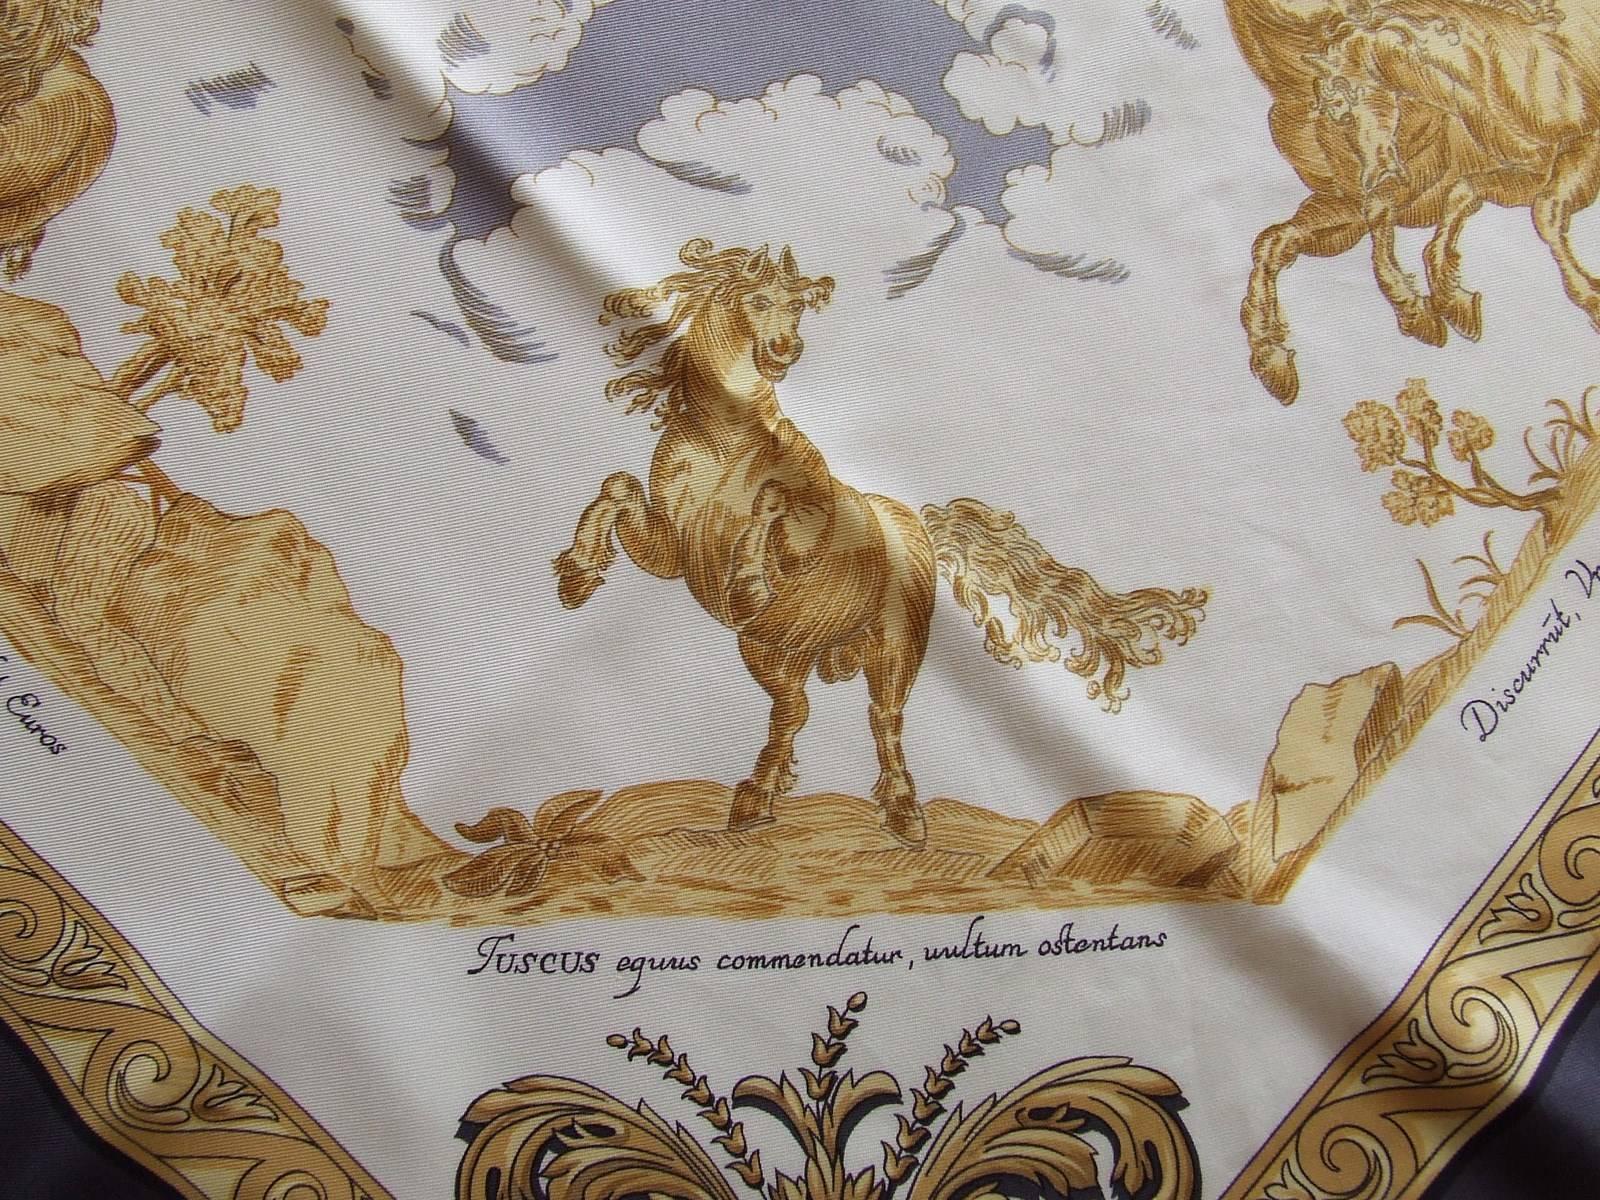 AMAZING AND BEAUTIFUL AUTHENTIC HERMES SCARF

Pattern: 